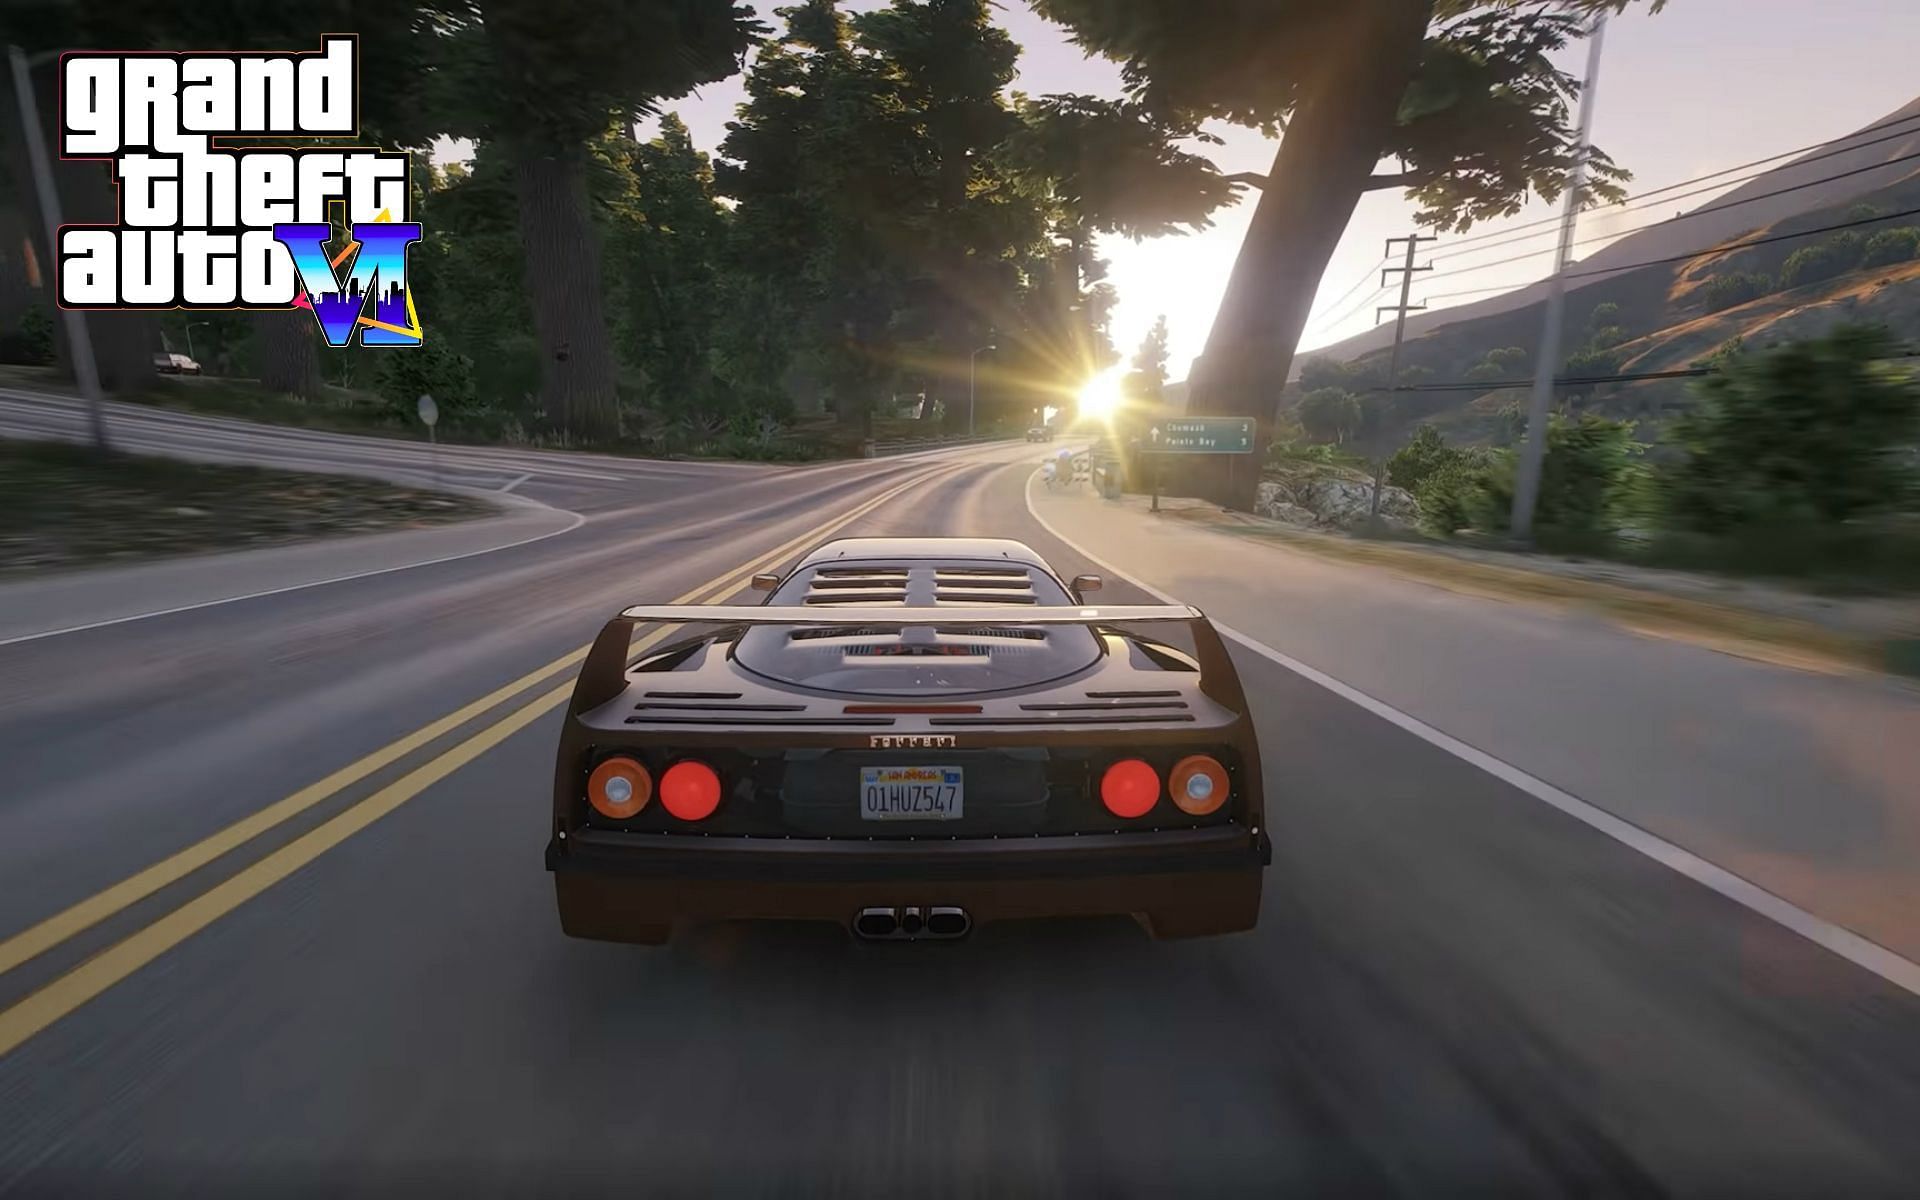 Fact Check Is GTA 6 coming out in 2022?